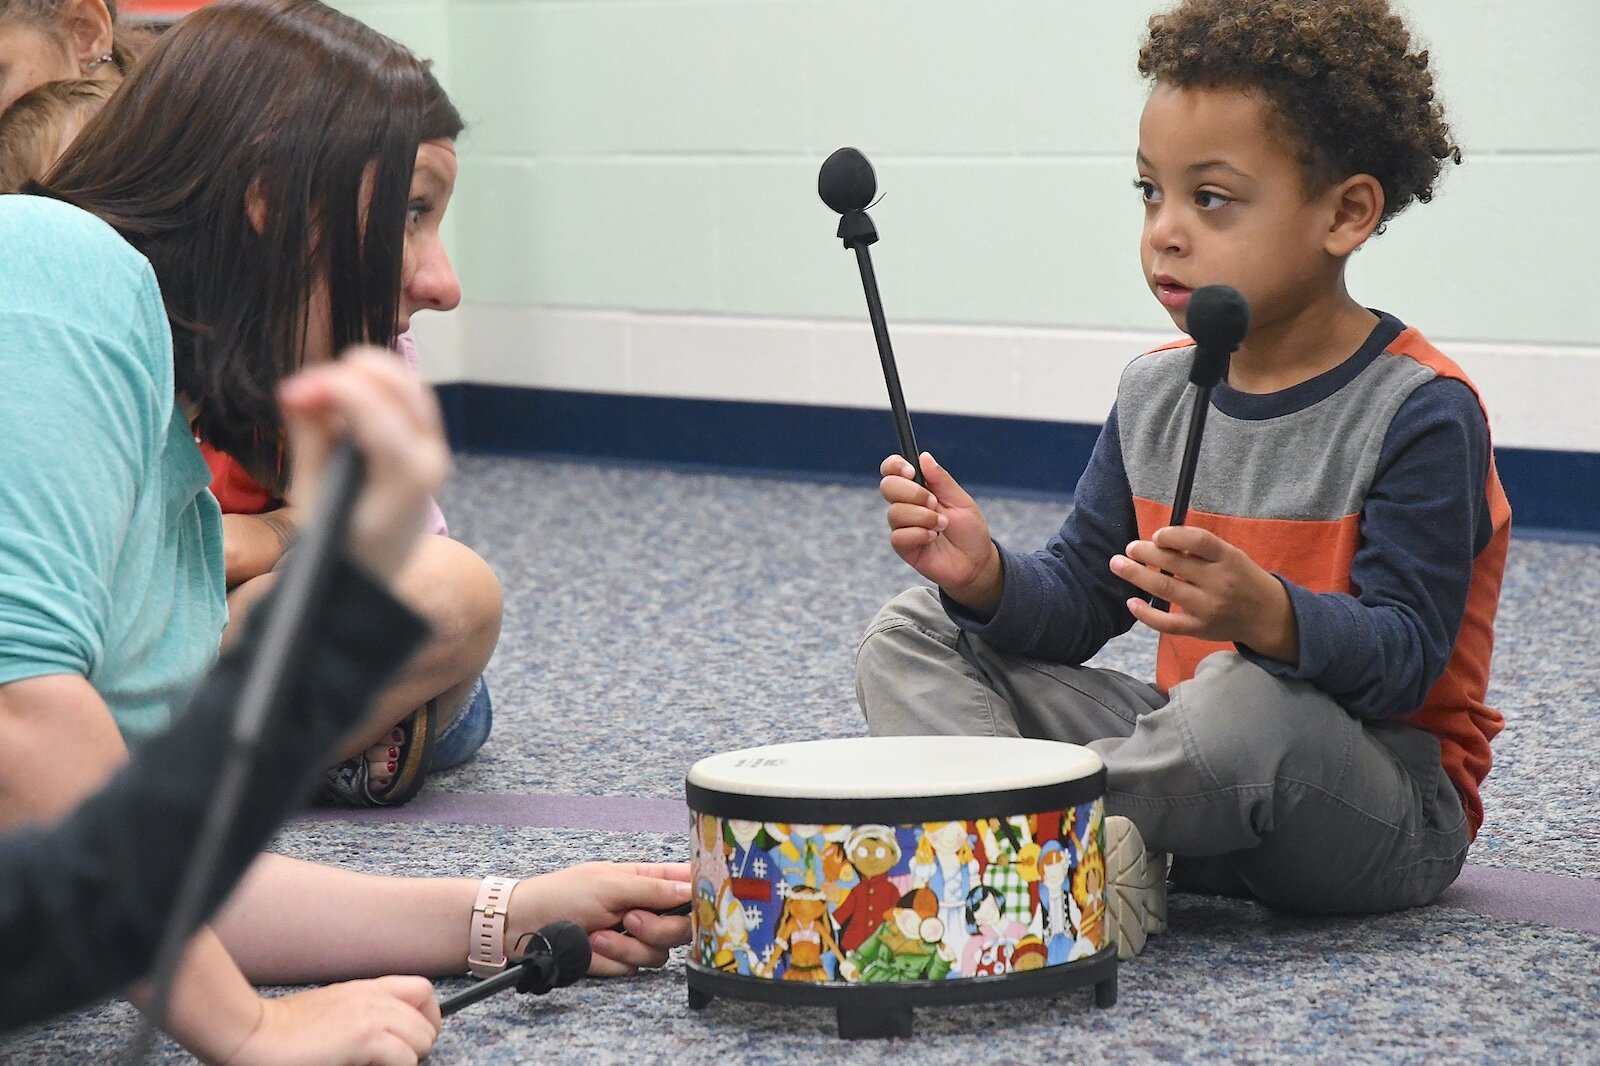 Malik Alexander, 4, and Teri Noaeill, instructor, play together during a Music First session at the Music Center.